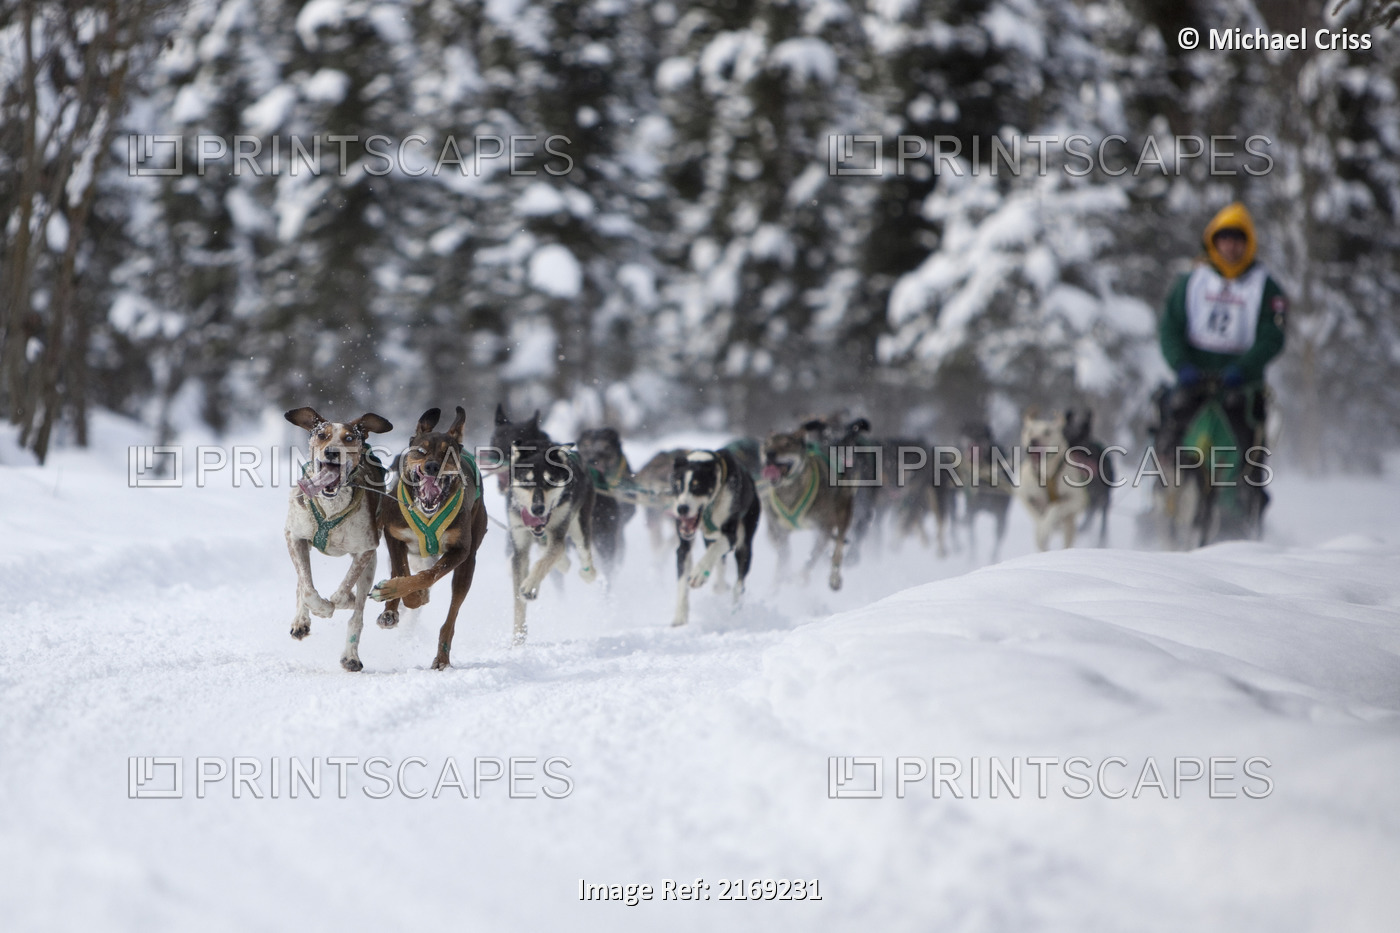 Blayne Streeper And Team Mushing During The 2010 Fur Rondy Sled Dog ...